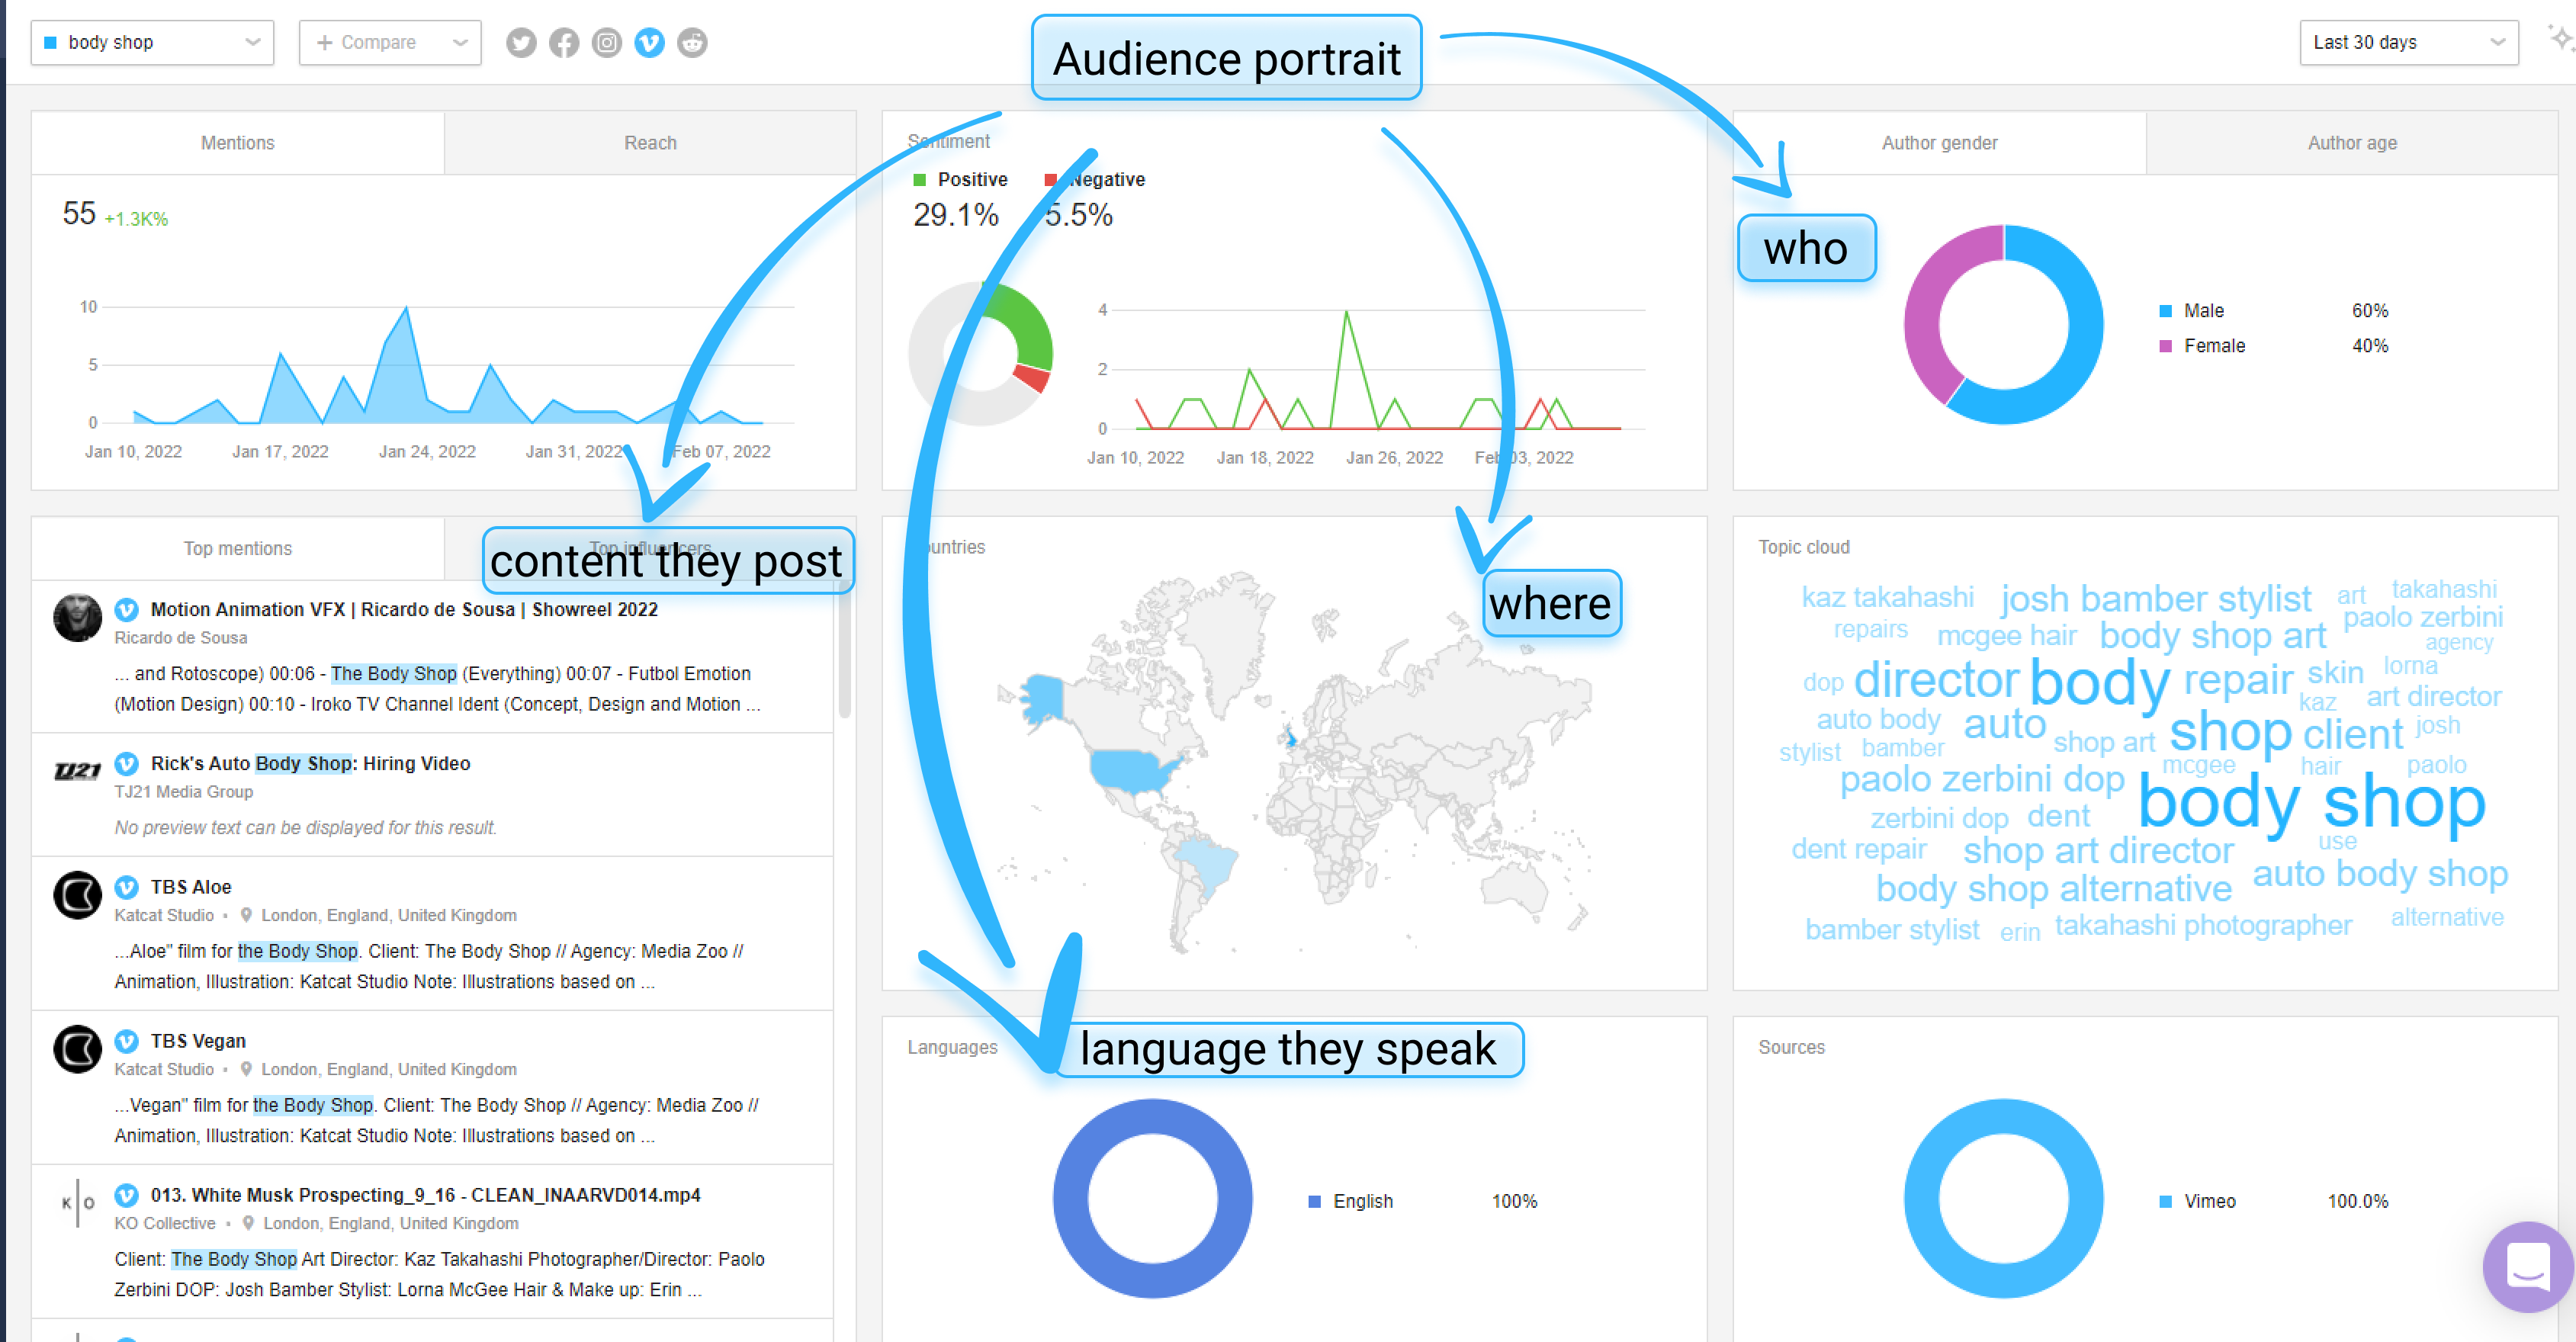 Awario dashboard for Vimeo source with details of audience portrait 